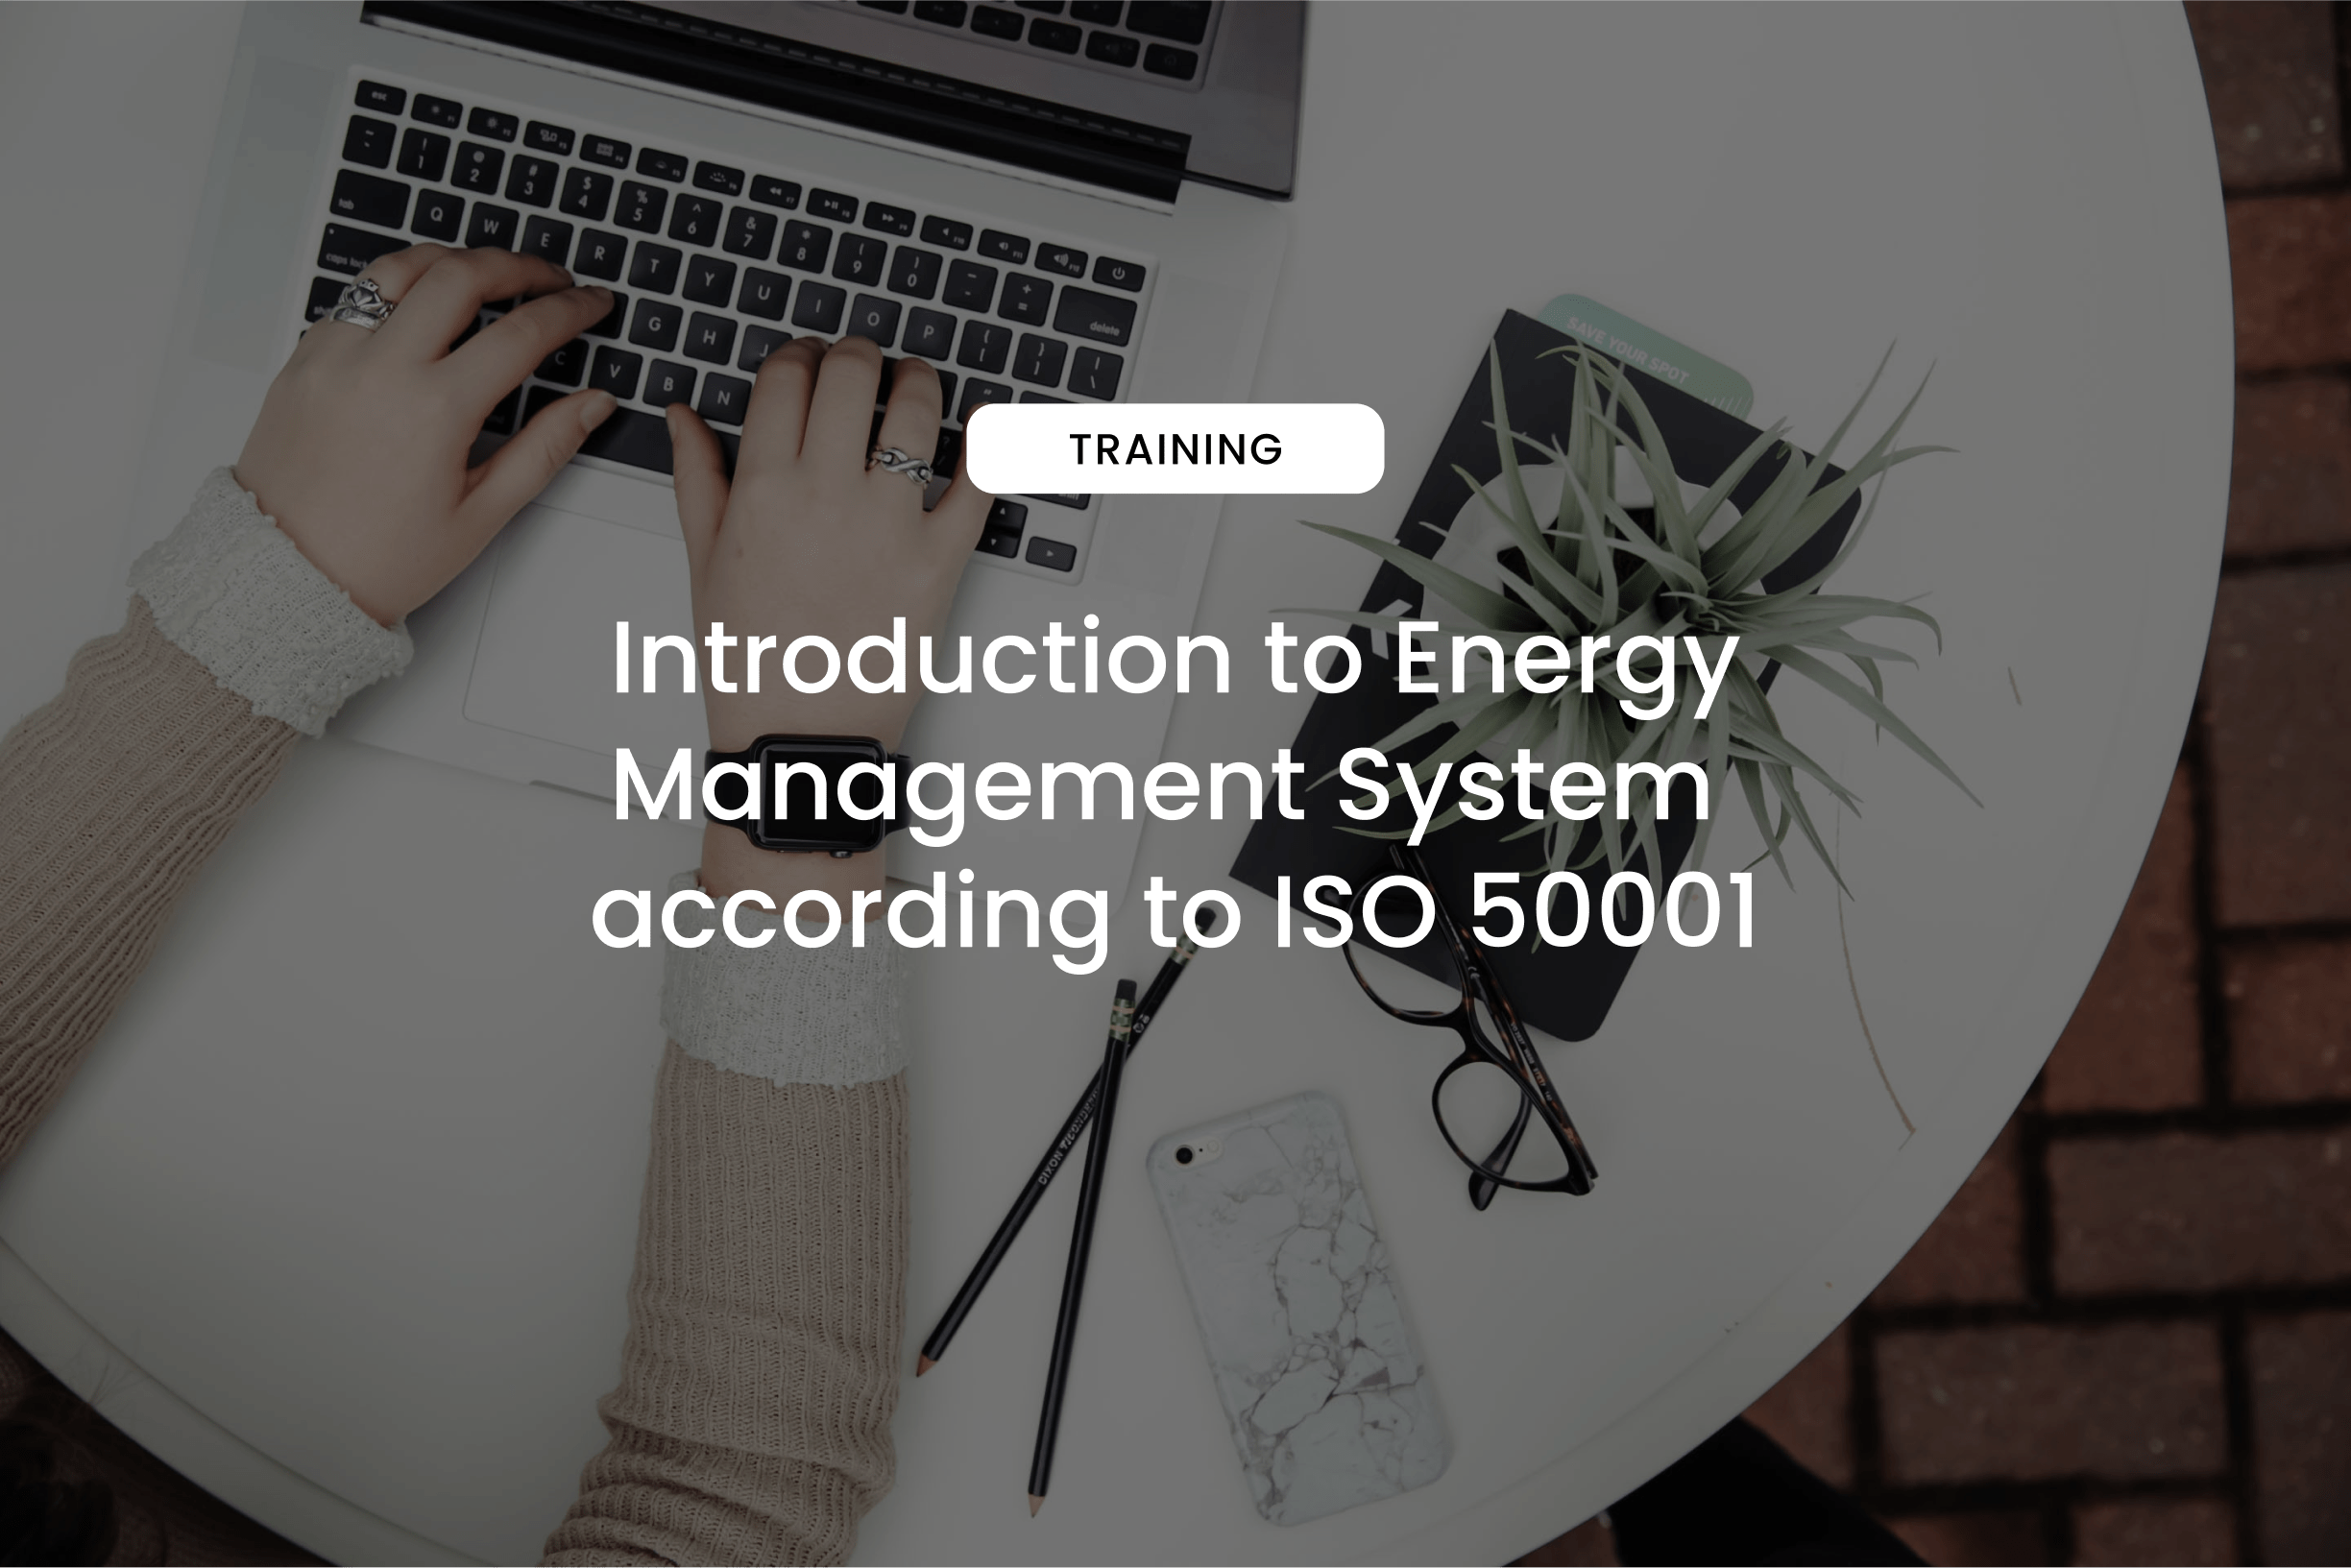 Introduction to Energy Management System according to ISO 50001